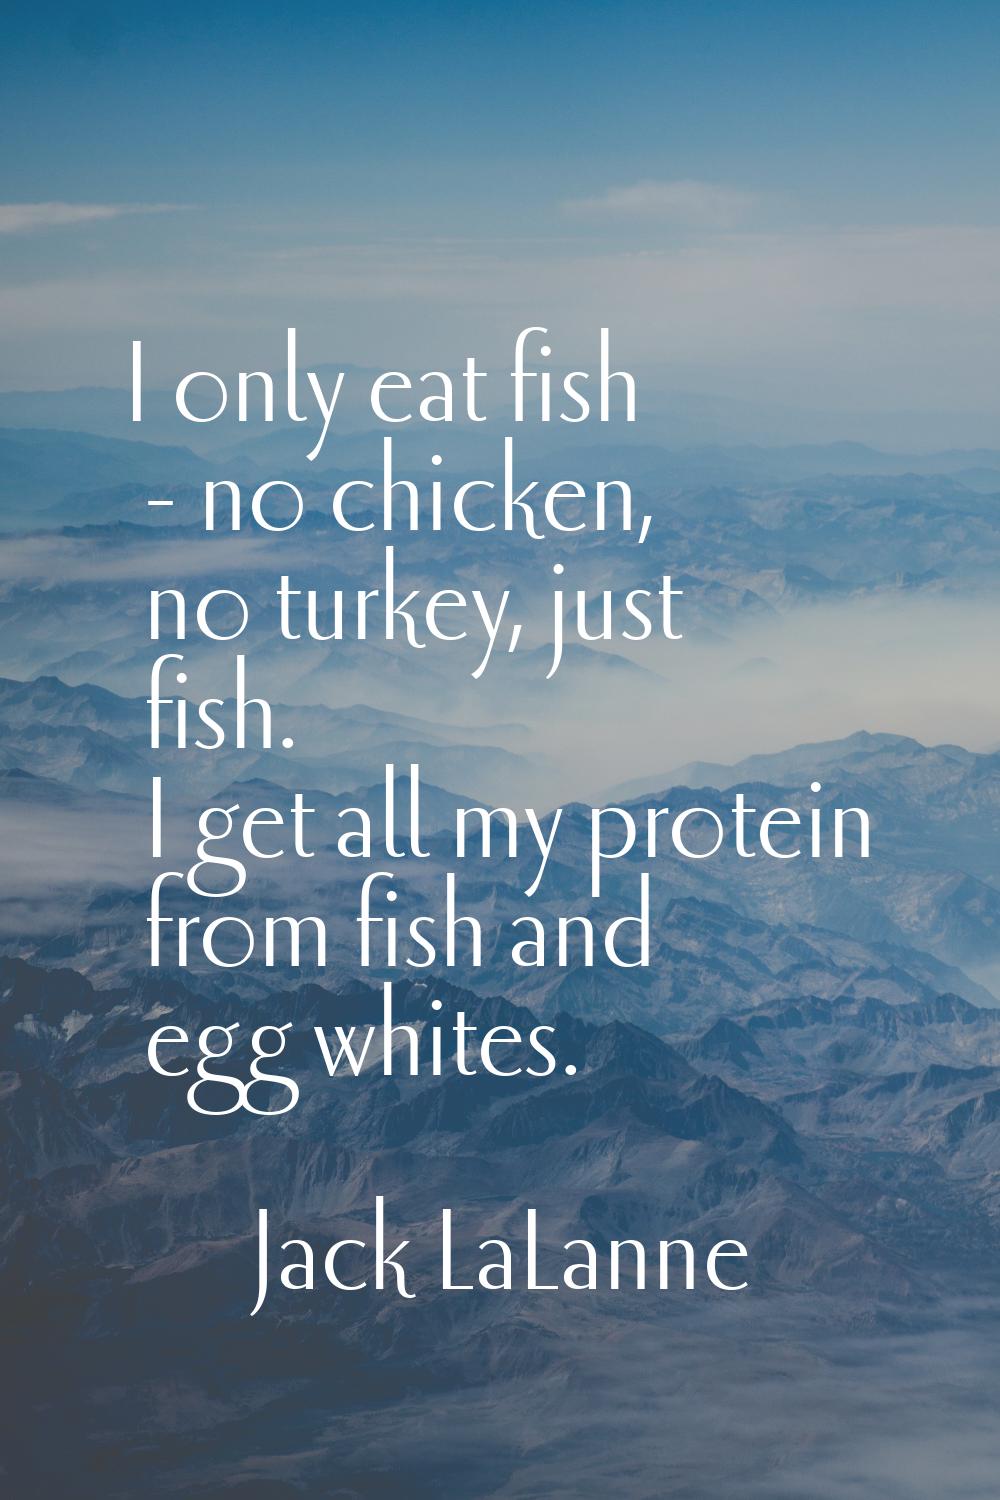 I only eat fish - no chicken, no turkey, just fish. I get all my protein from fish and egg whites.